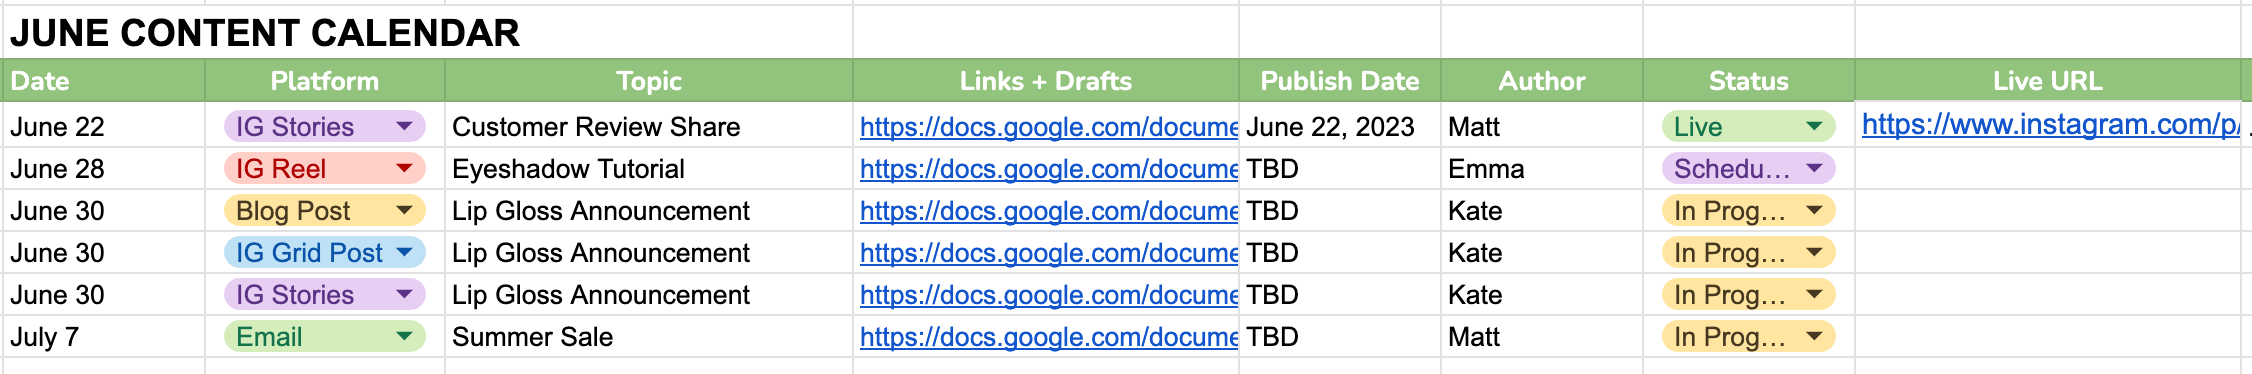 A screenshot from a sample content calendar on Google Sheets for a beauty brand. It is titled June Content Calendar and has 8 columns: date, platform, topic, links and drafts, publish date, author, status, and live URL. It shows 6 entries for sample content pieces with all of the columns filled in for each. 